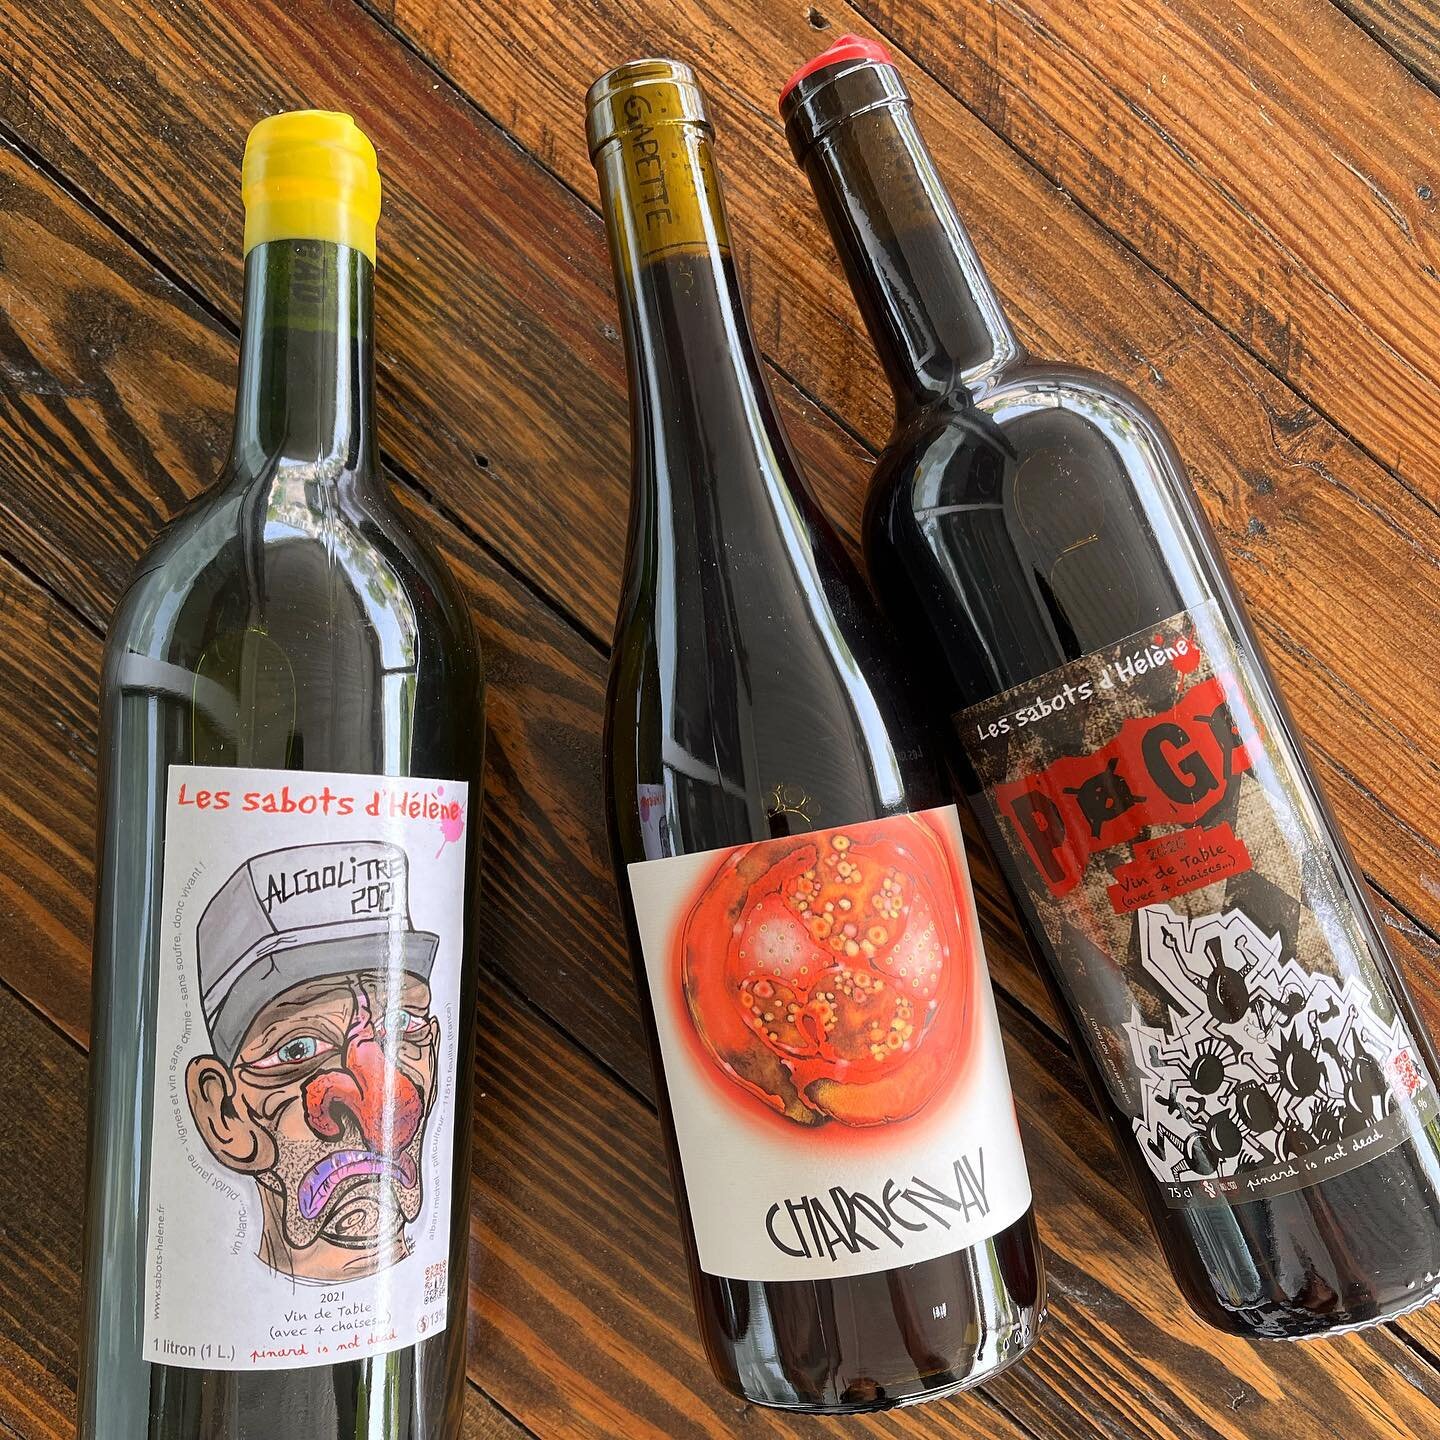 i n t r o d u c i n g 🥁

these new wines to our shelves from
 @d_i.wine // @naturalvbdistro 

come taste them tomorrow 
6 - 8 p m 🇫🇷

theyre so good! so fresh, lil funky. 🙃